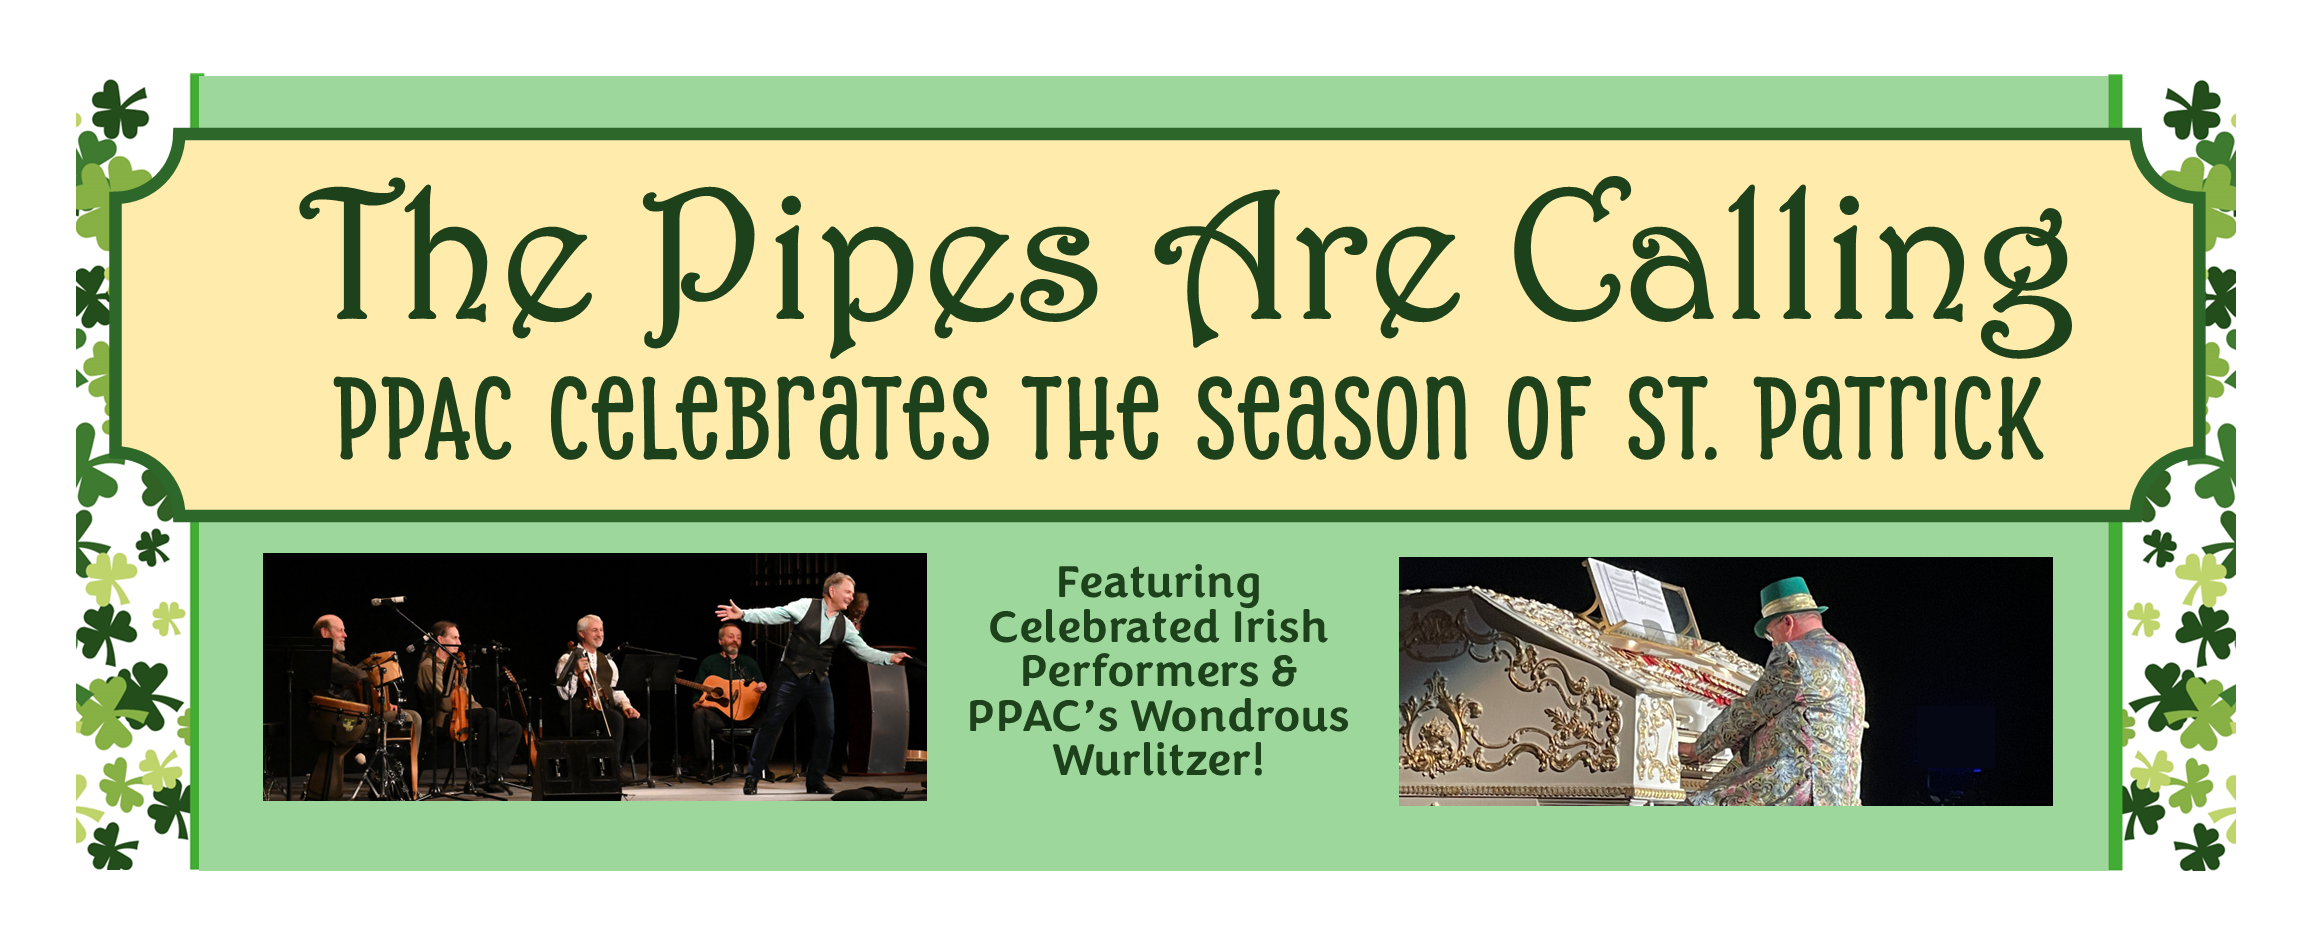 The Pipes are Calling: PPAC Celebrates the Season of St. Patrick